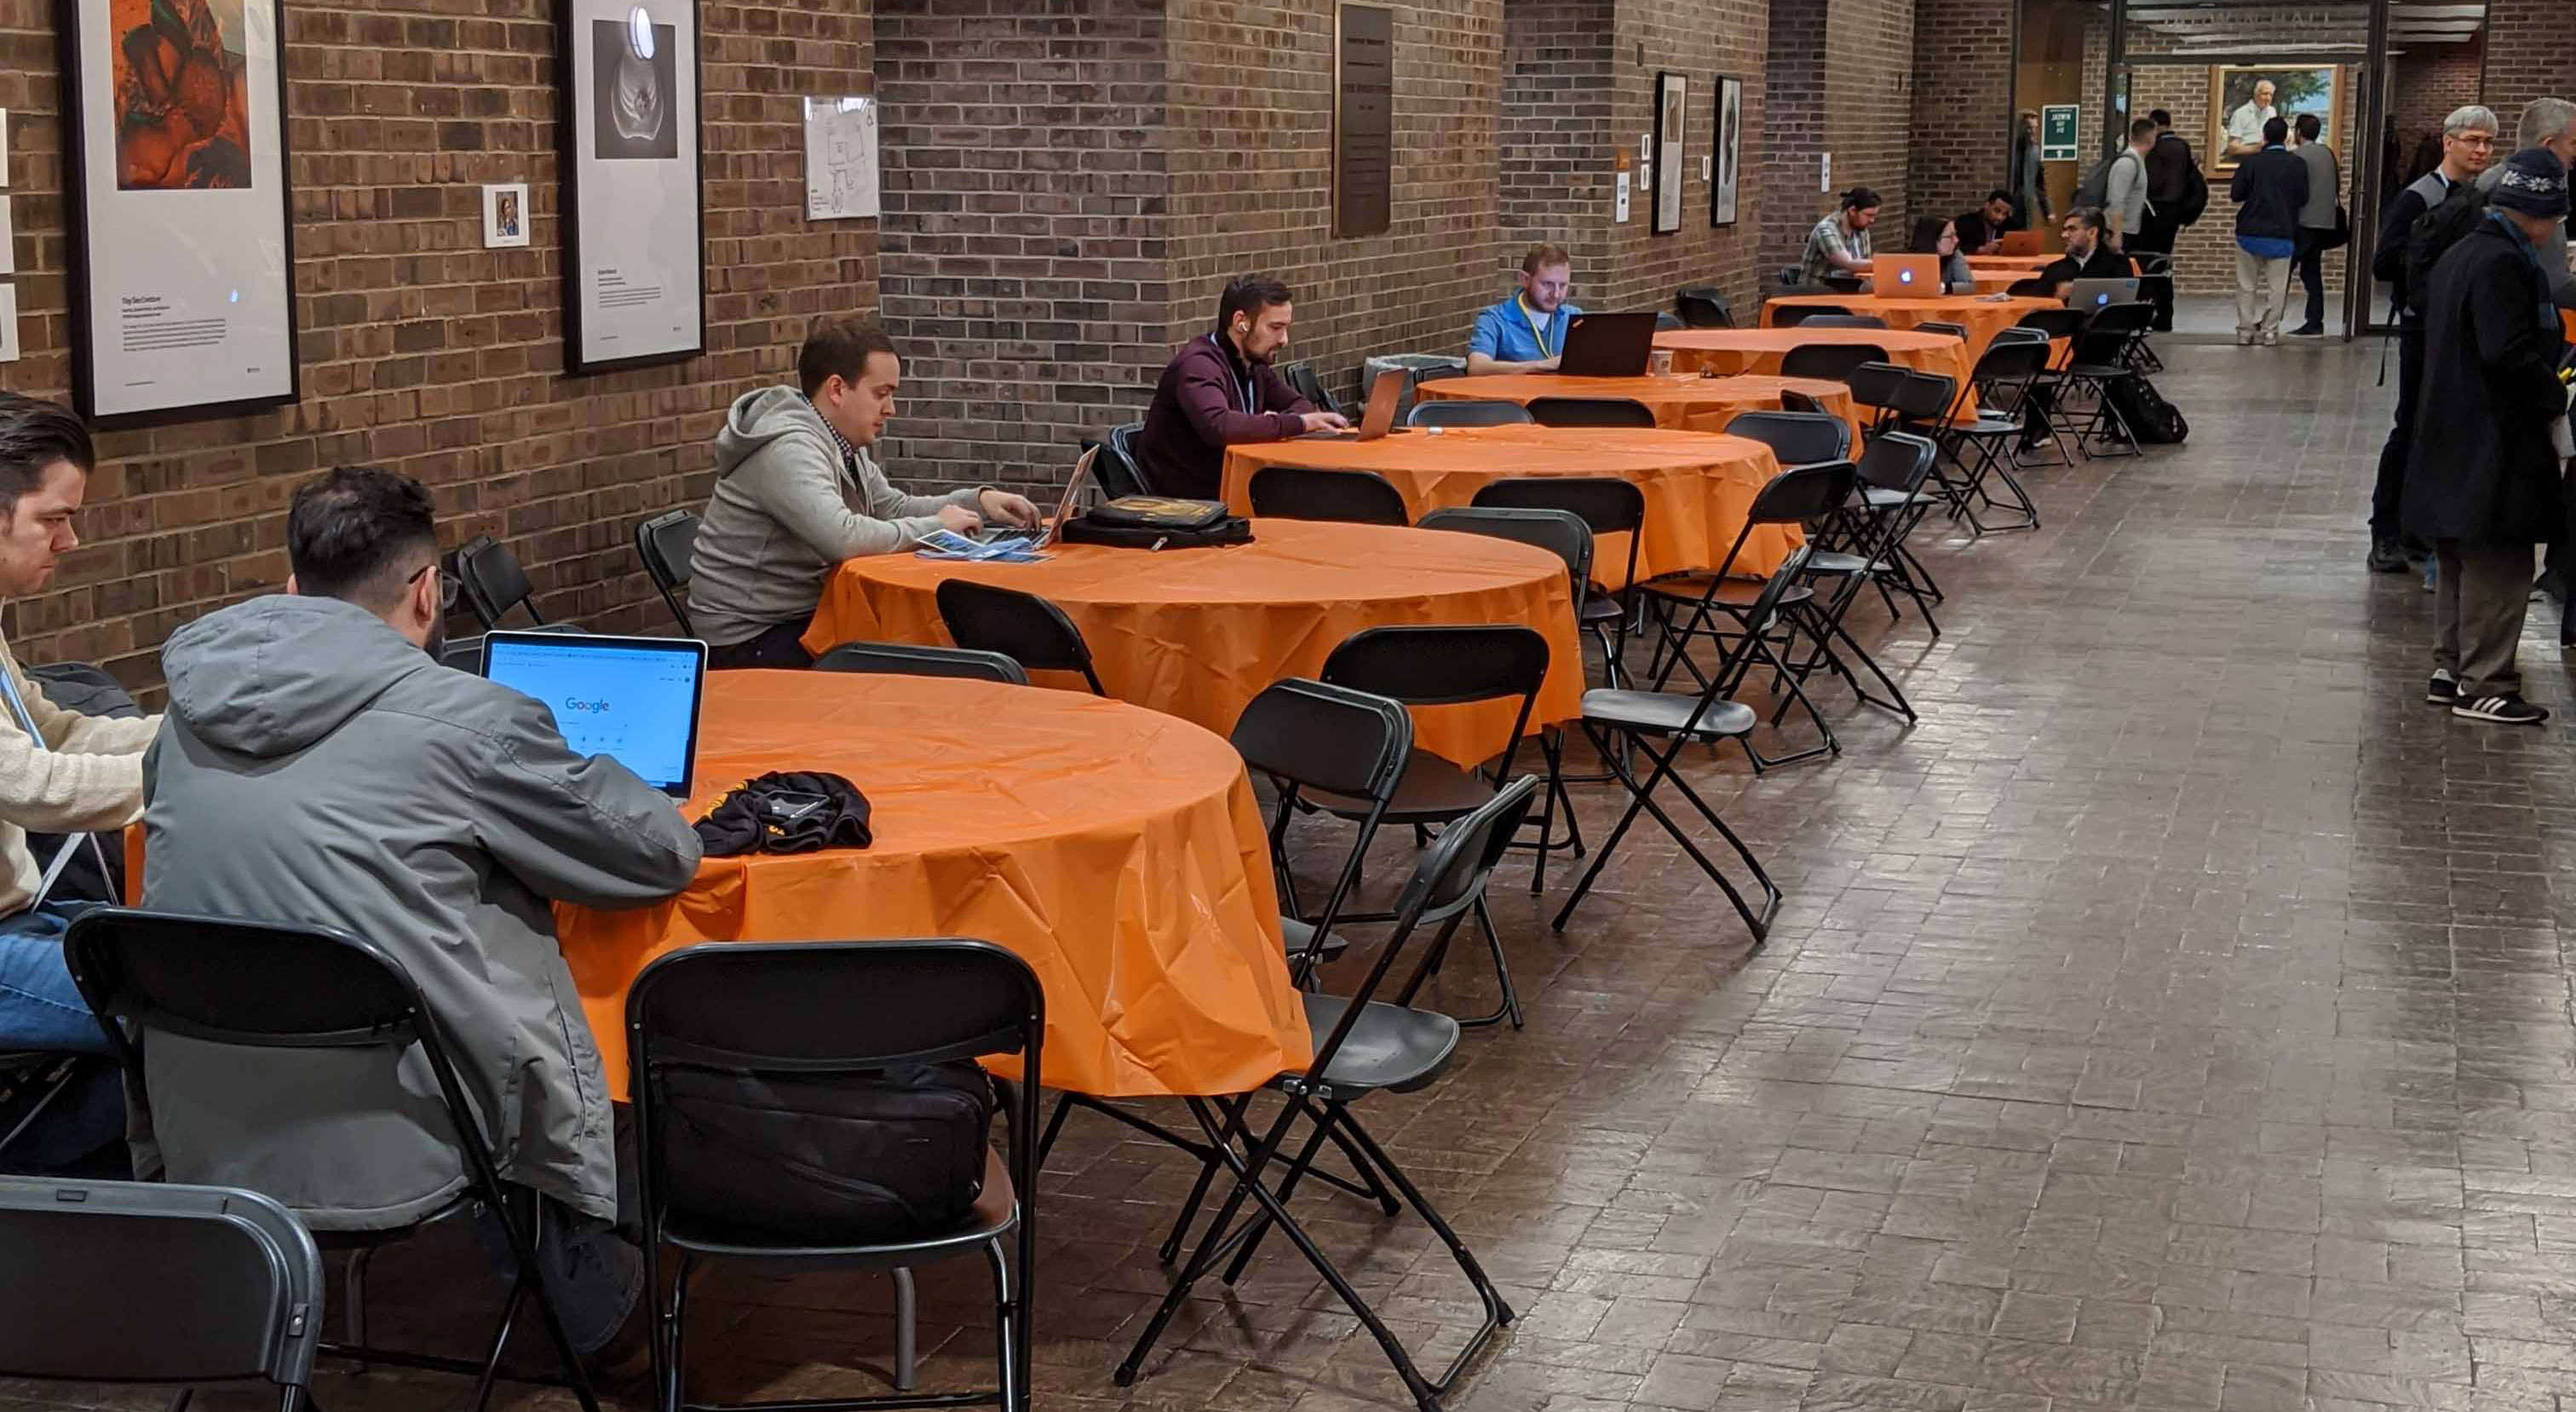 conference tables with orange table cloths and black chairs